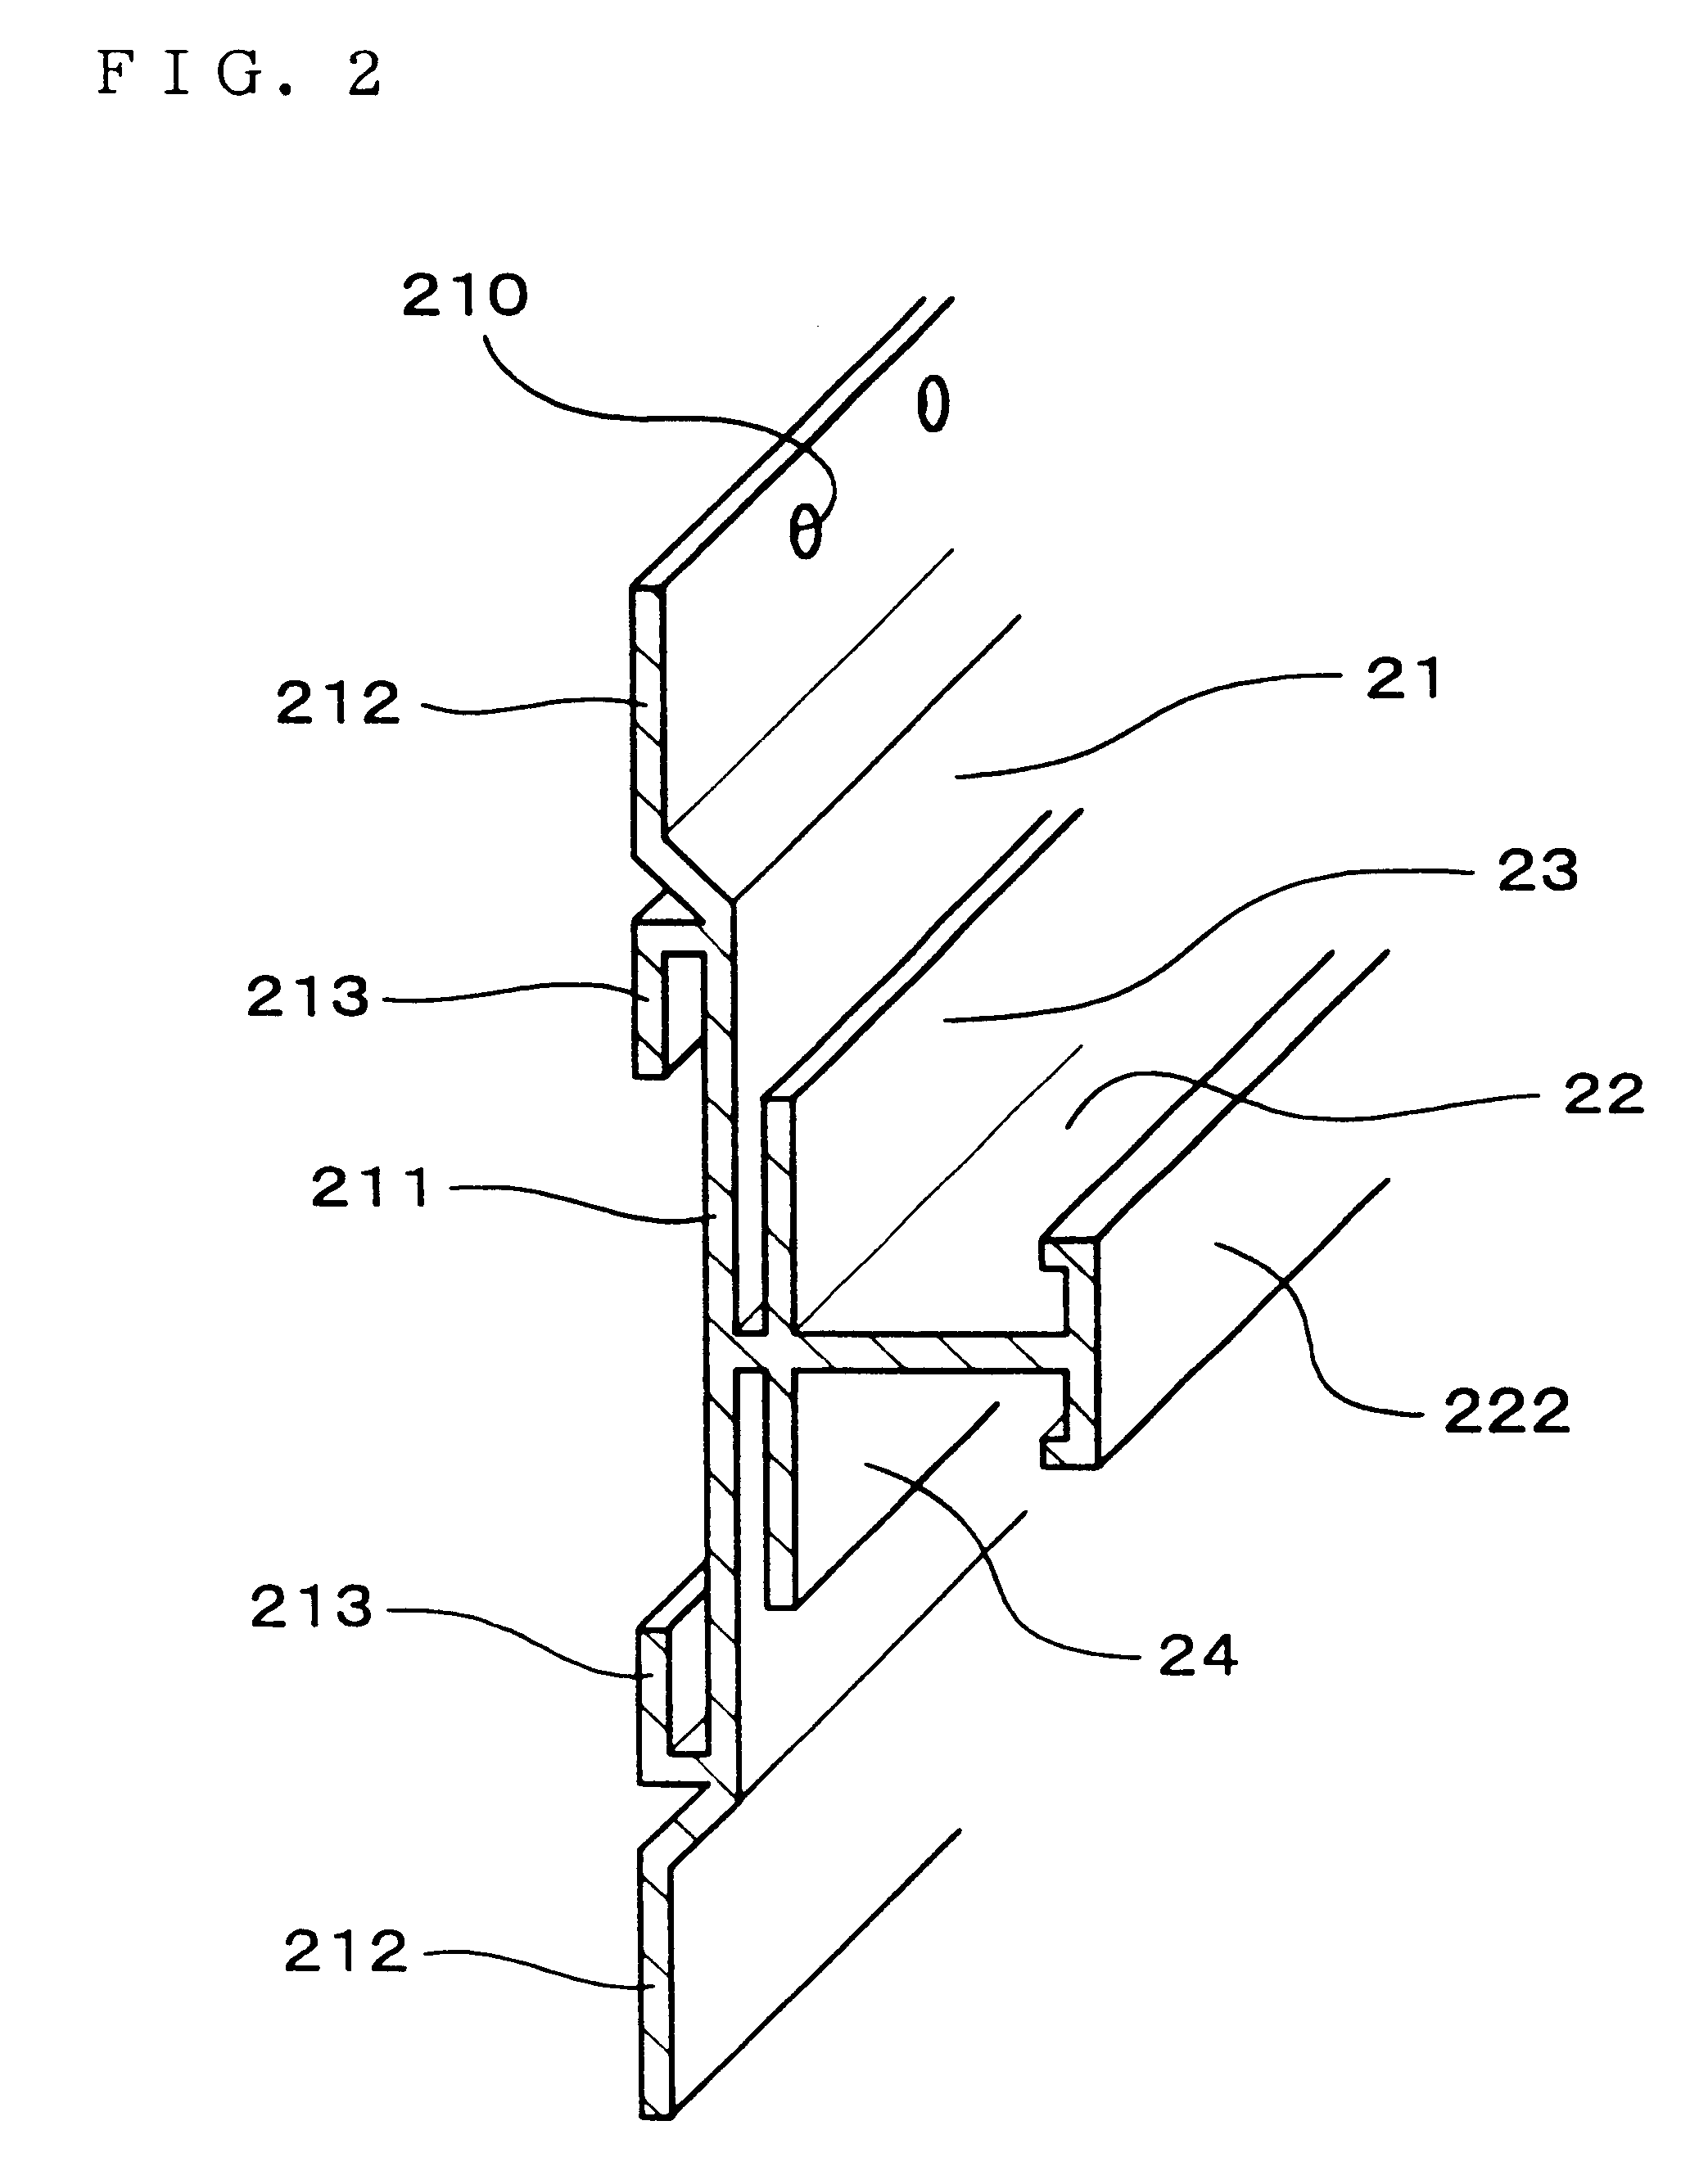 Metal fixture assembly for installation of vertical sidings, construction and method of installation